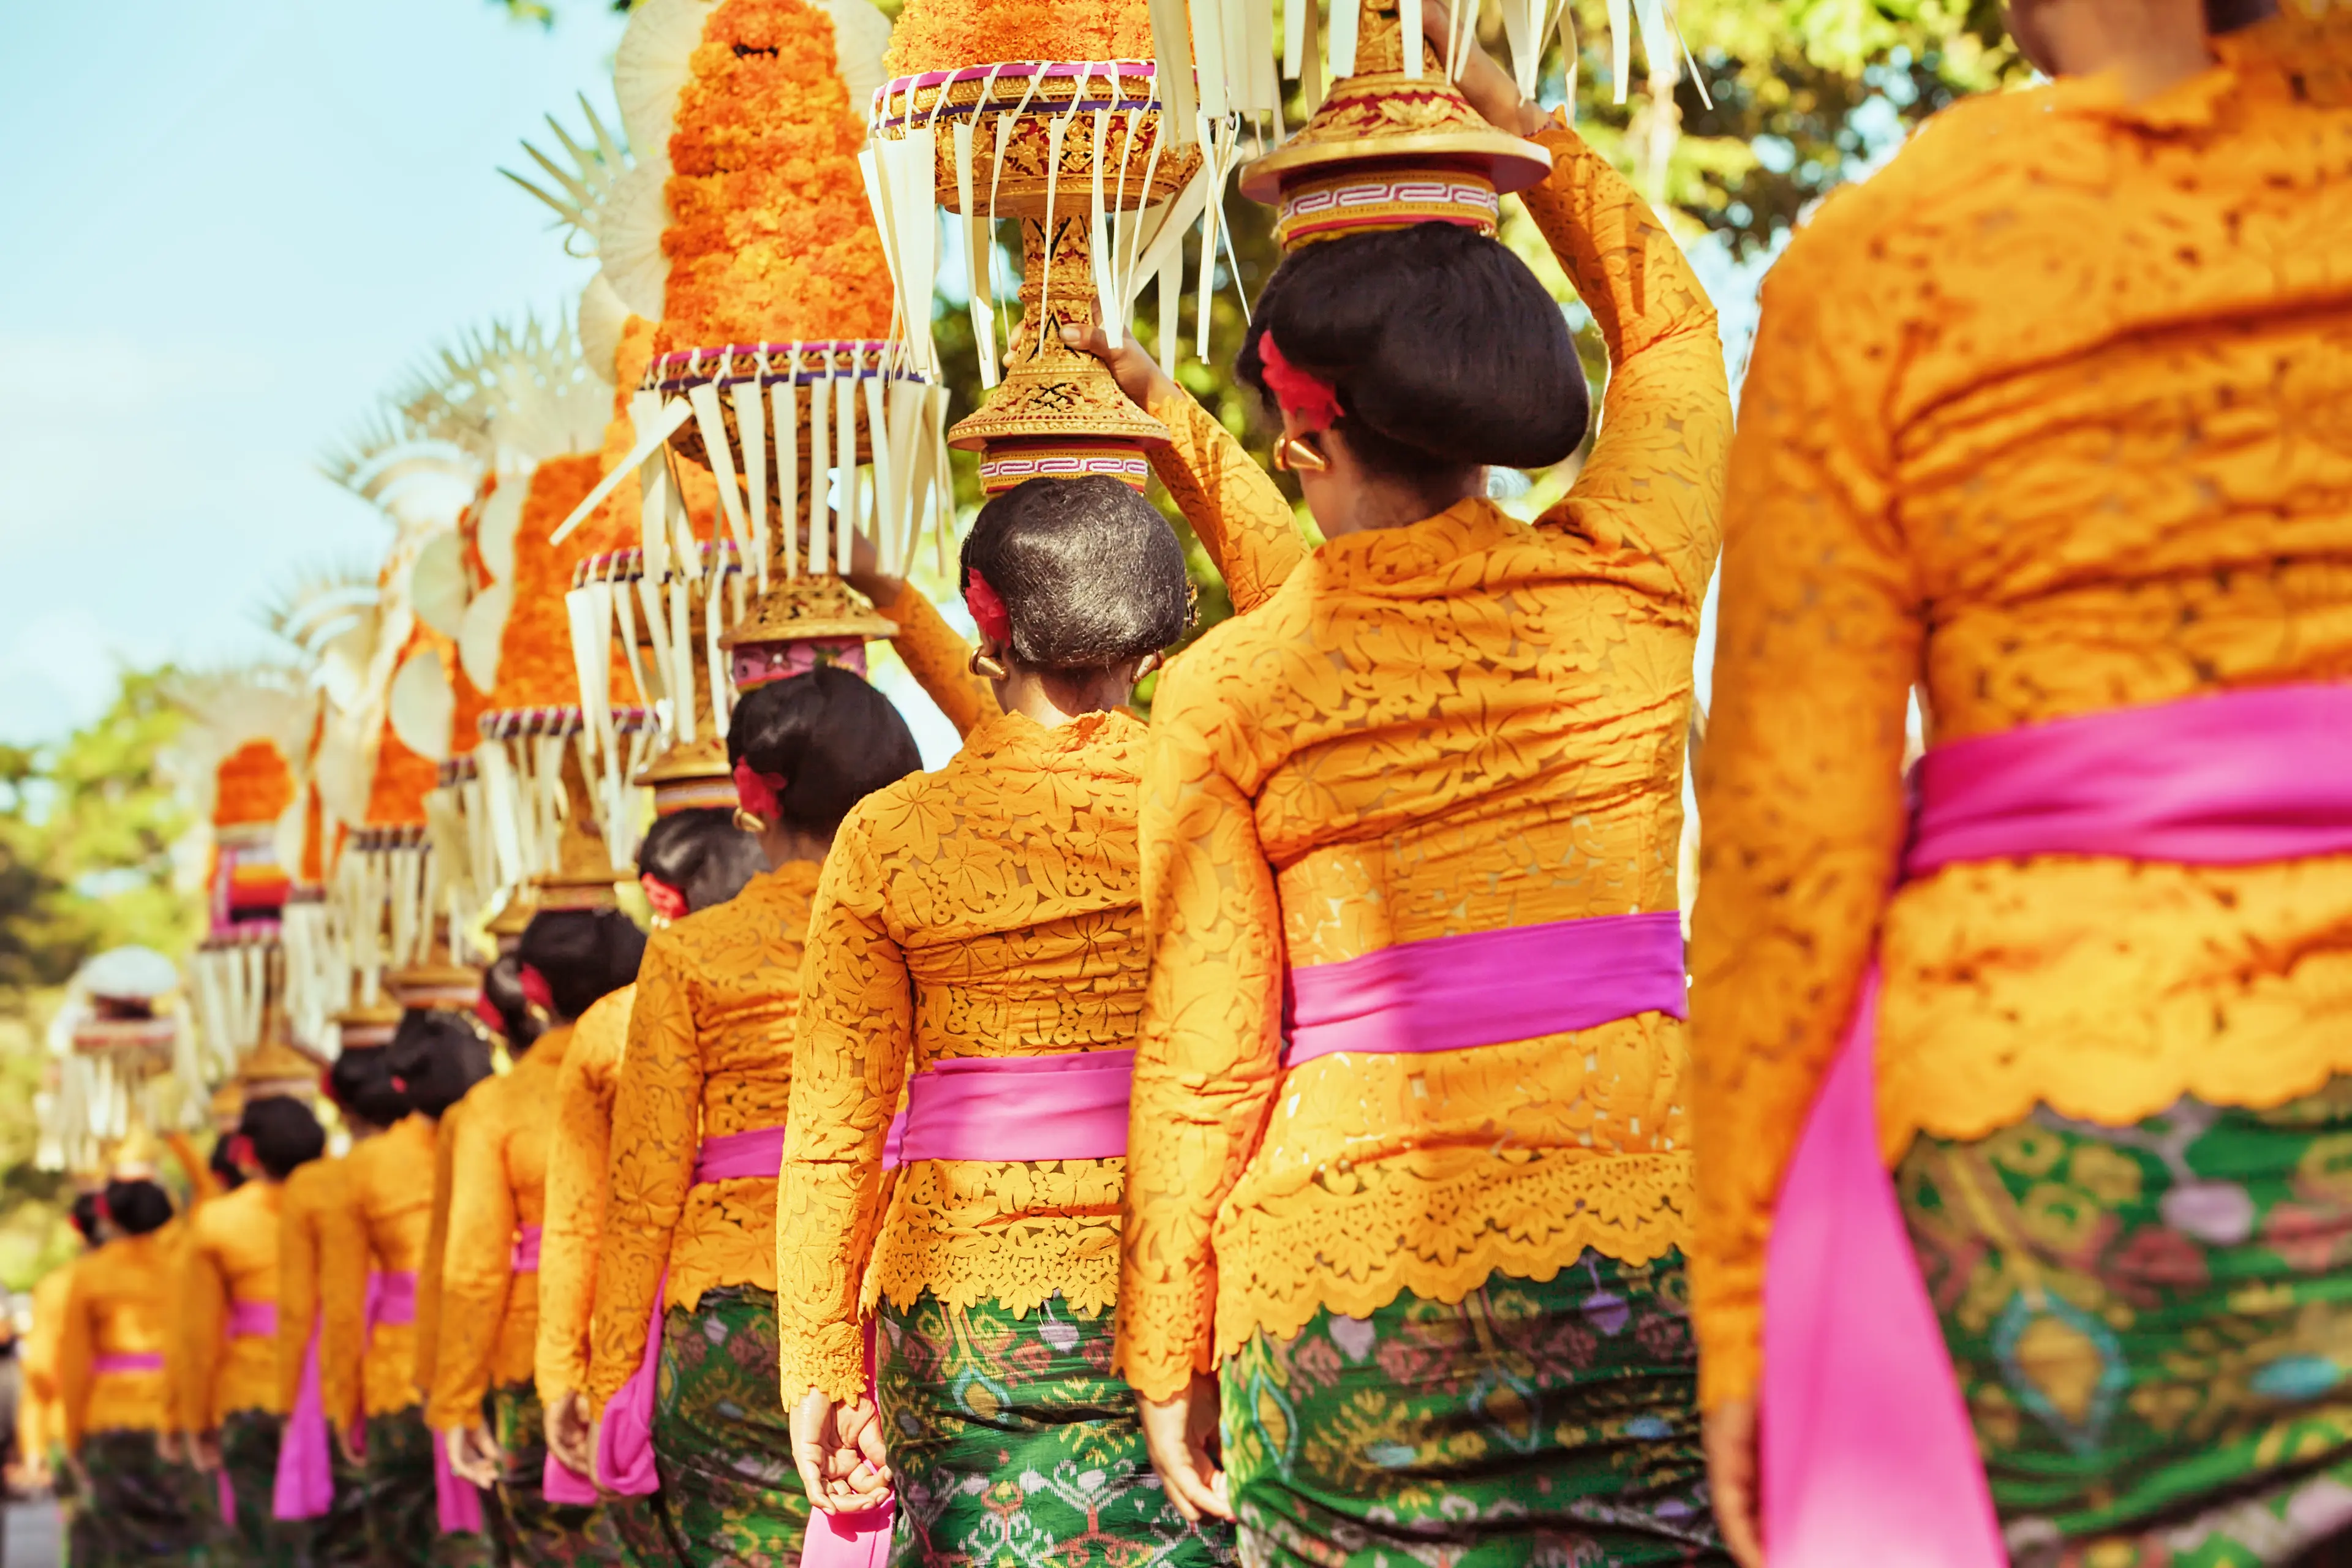 Balinese women in traditional costumes - sarong, carry offering on heads for Hindu ceremony